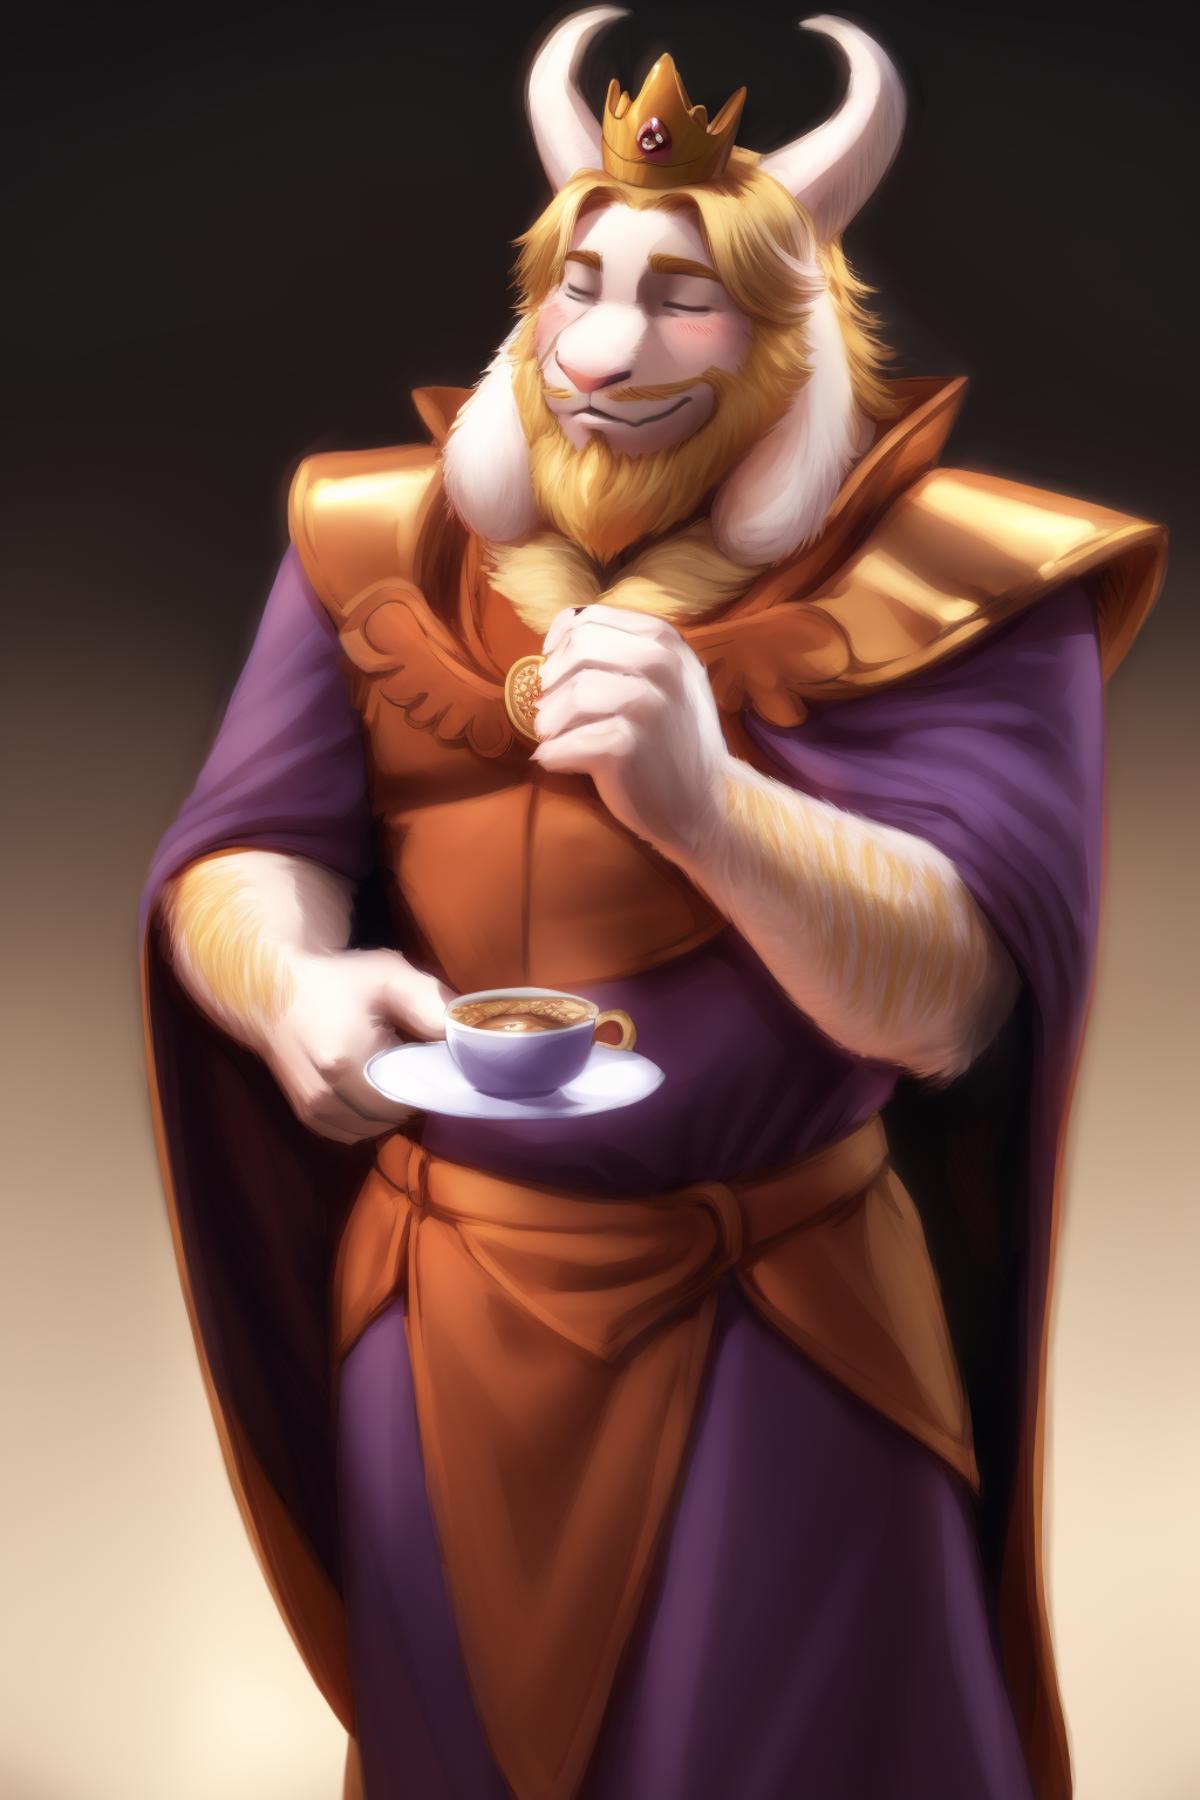 Asgore - Undertale image by Orion_12